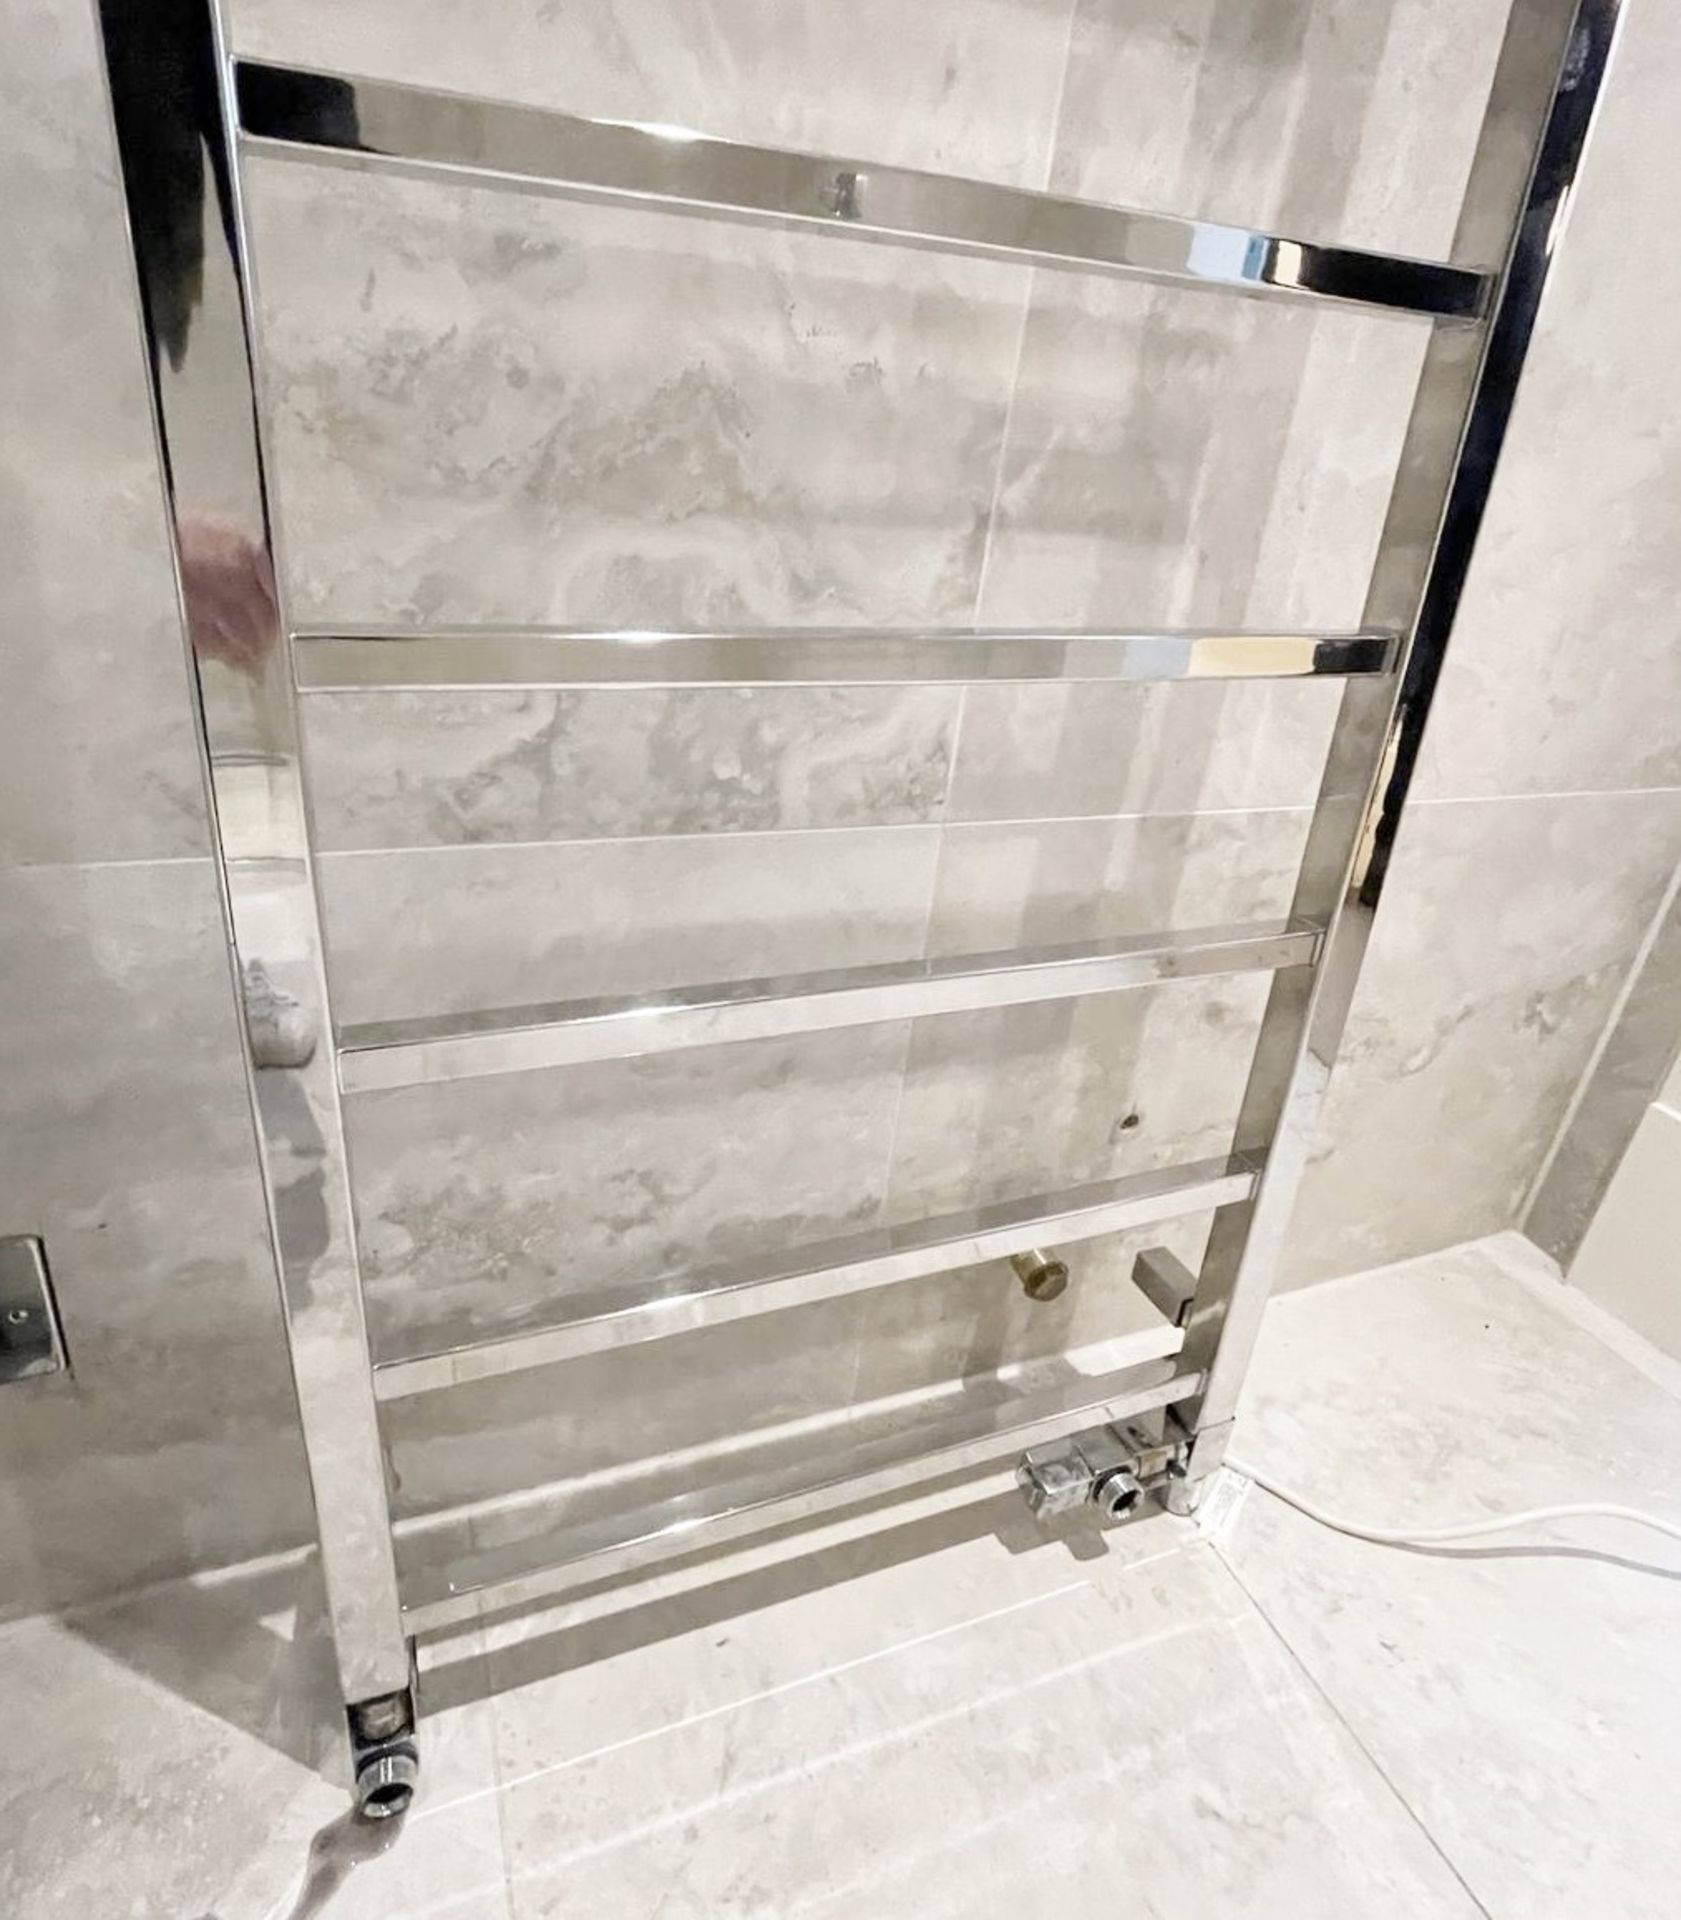 1 x Premium Towel Radiator in Chrome - Ref: FBED/R-LDG - CL896 - NO VAT ON THE HAMMER - Location: - Image 3 of 3